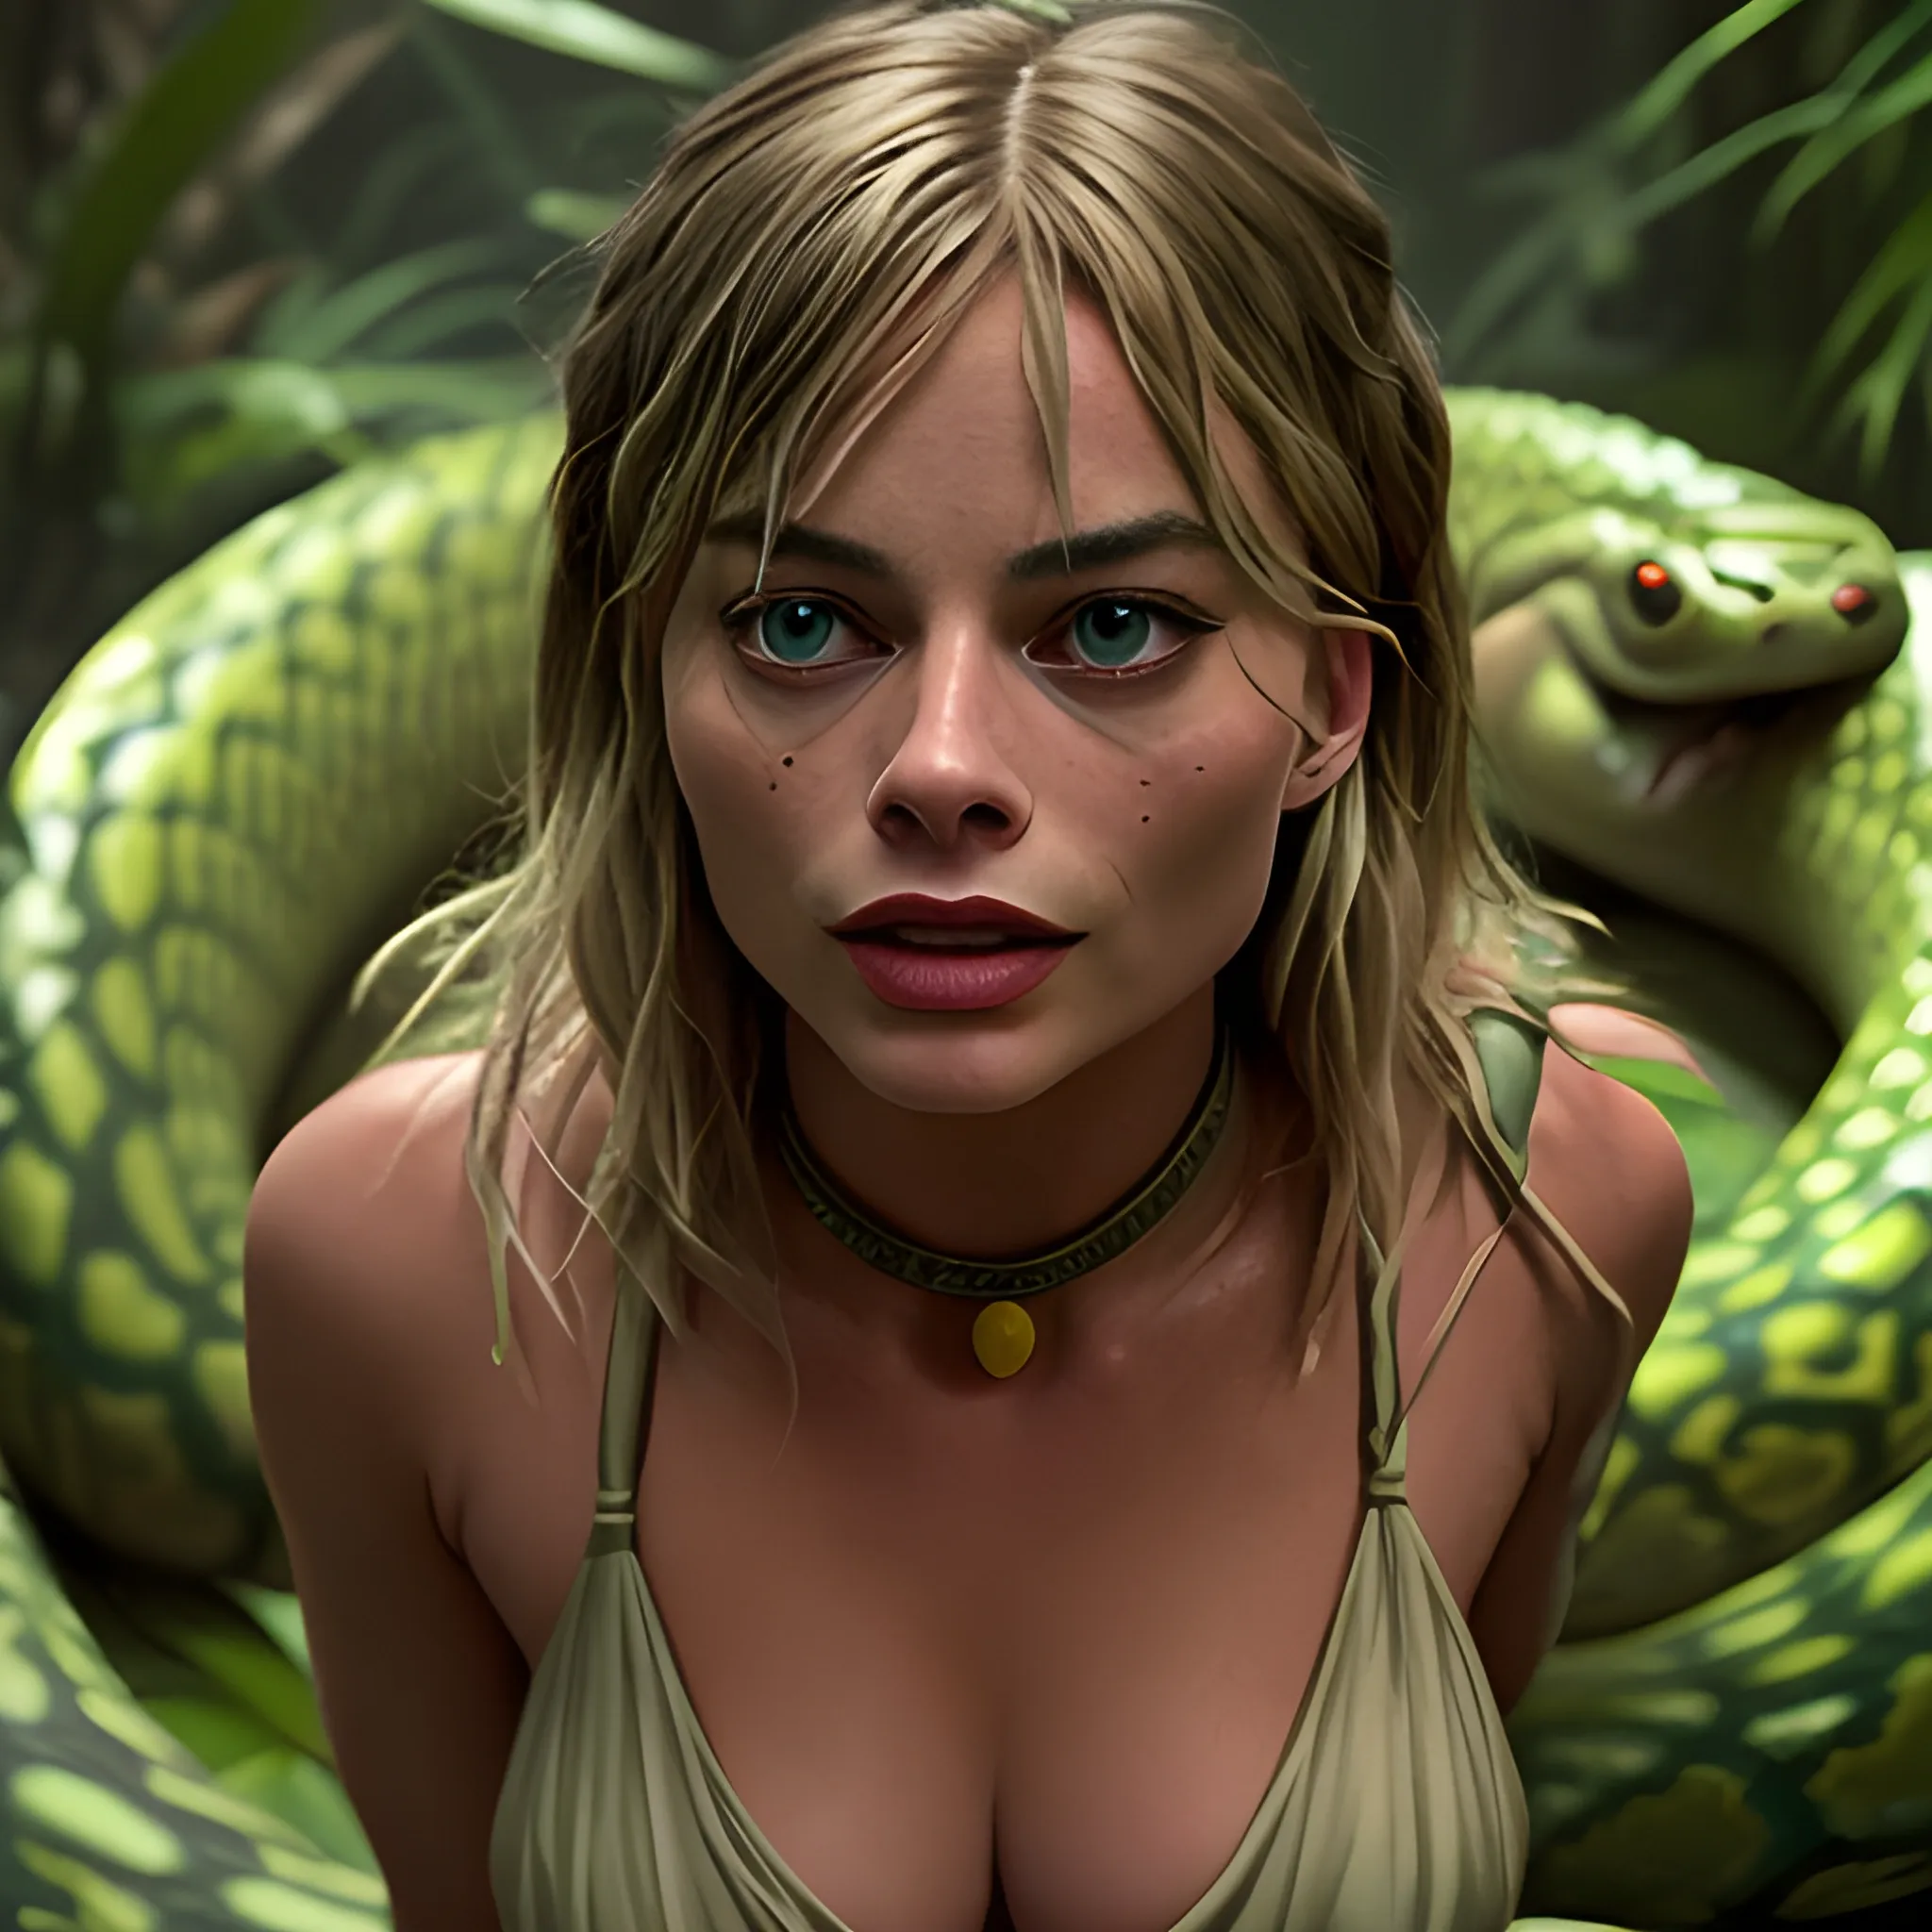 Margot Robbie as mowgli squeezed to death by a giant snake